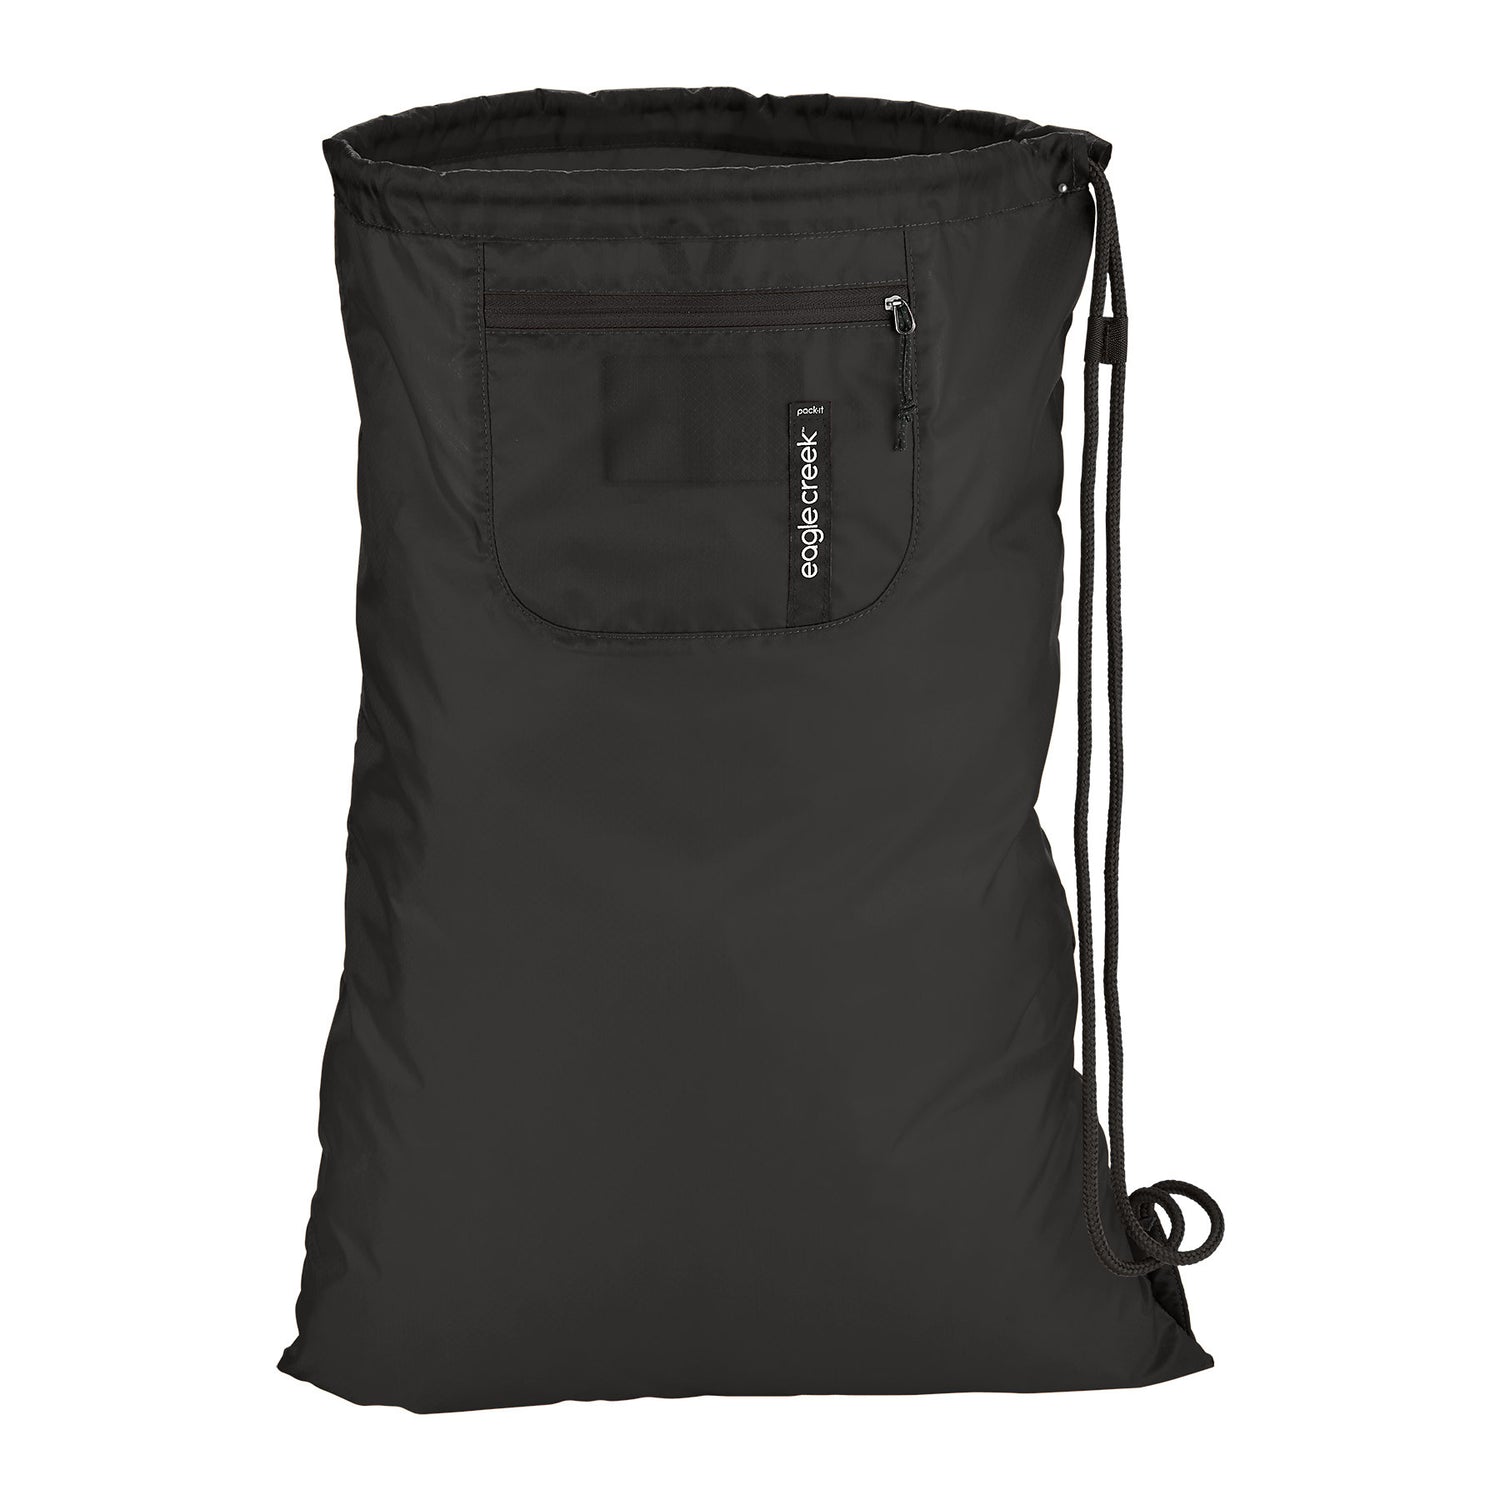 Non-Woven Laundry Duffel Bag with Over The Shoulder Strap